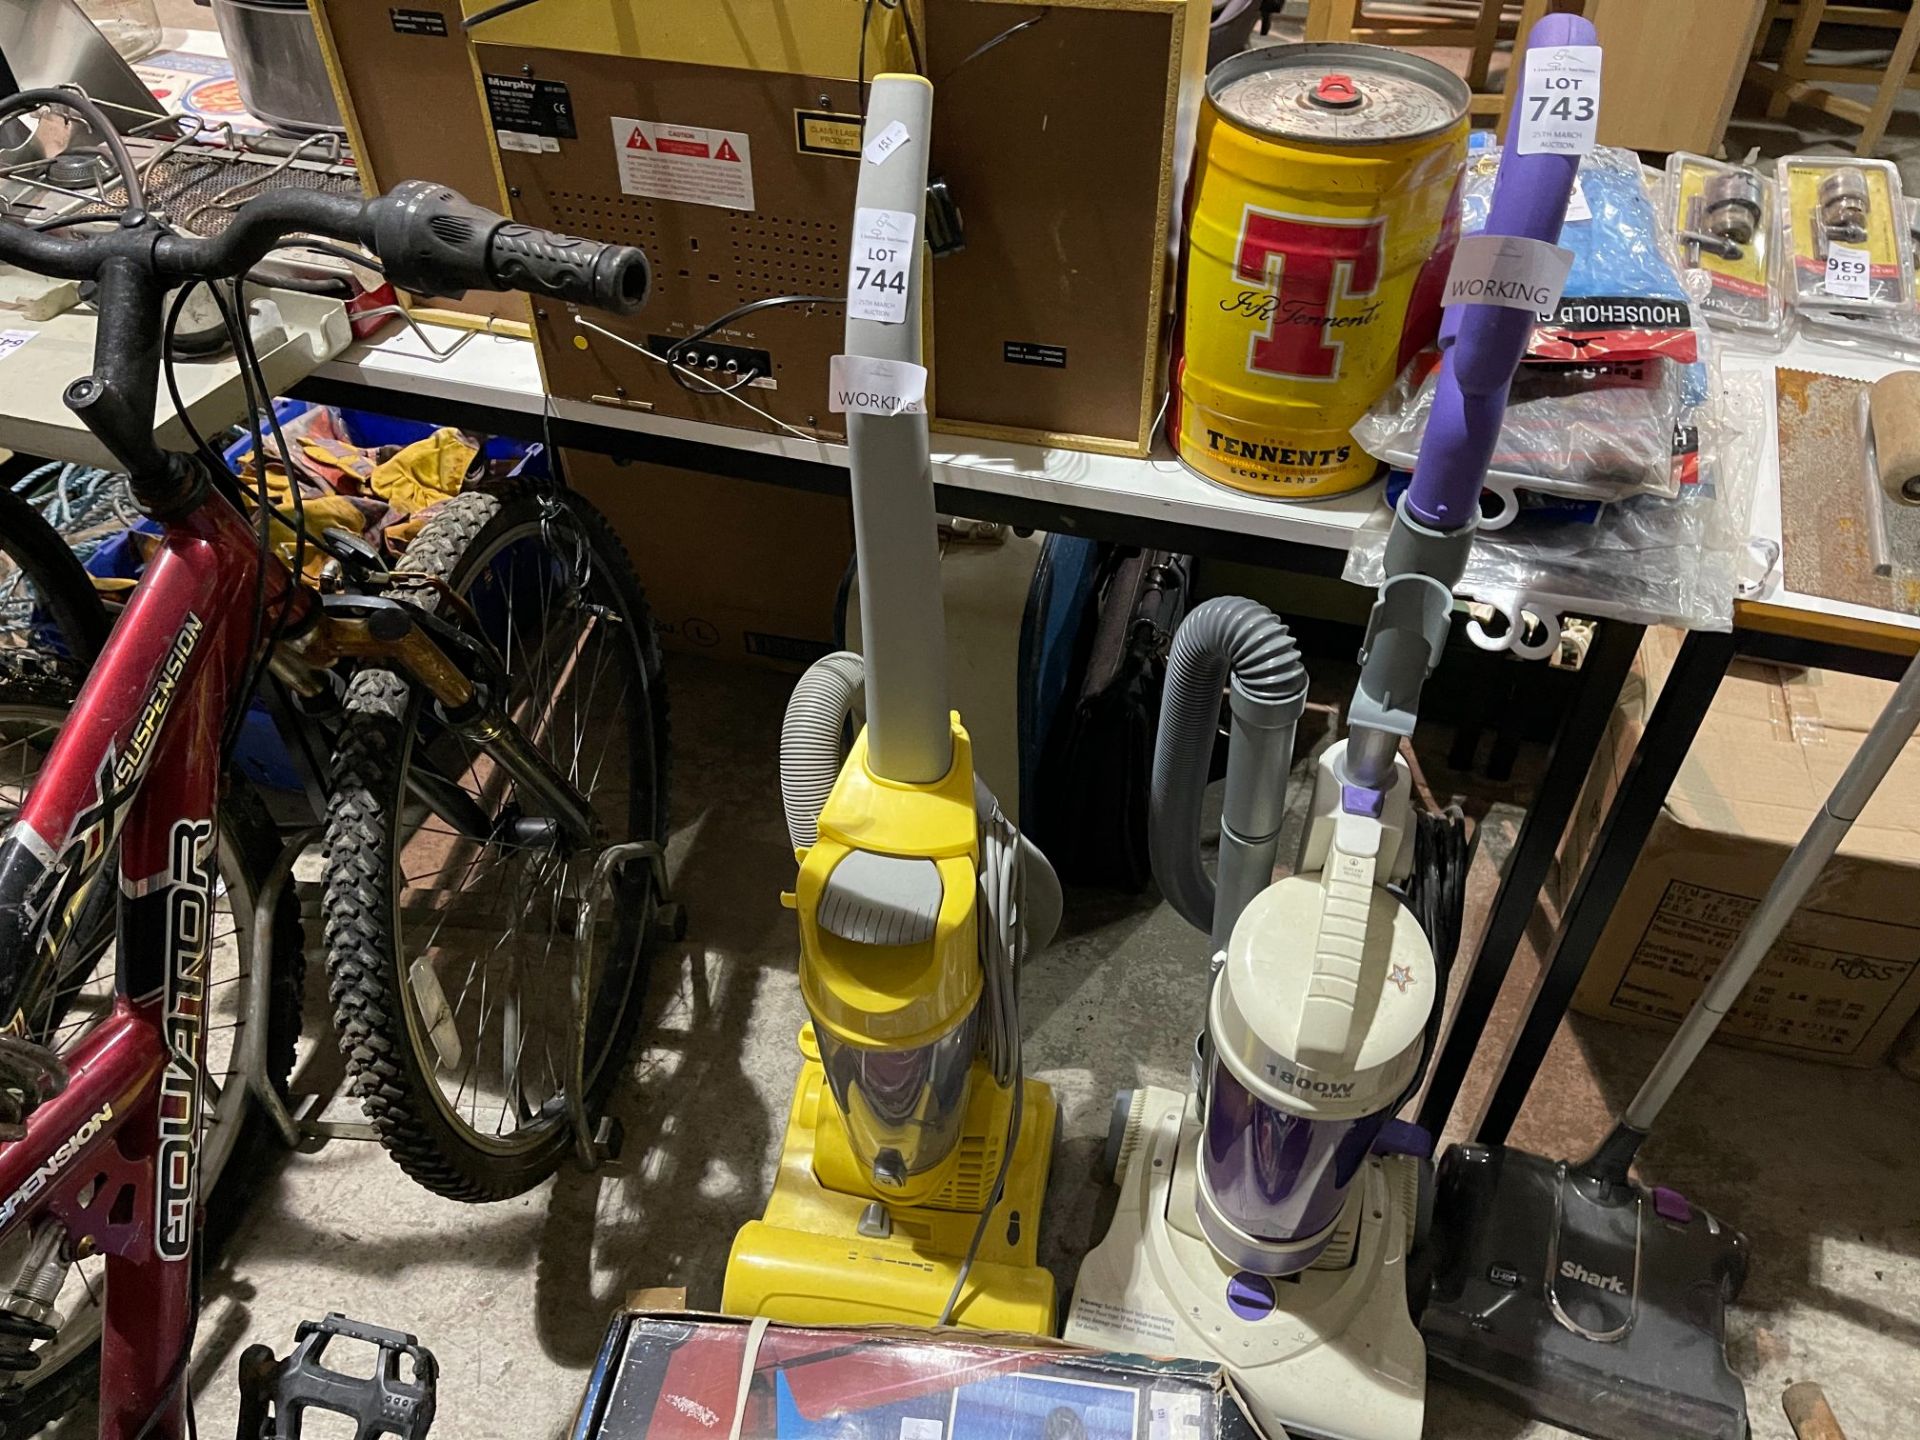 UPRIGHT BAGLESS VACUUM CLEANER WORKING